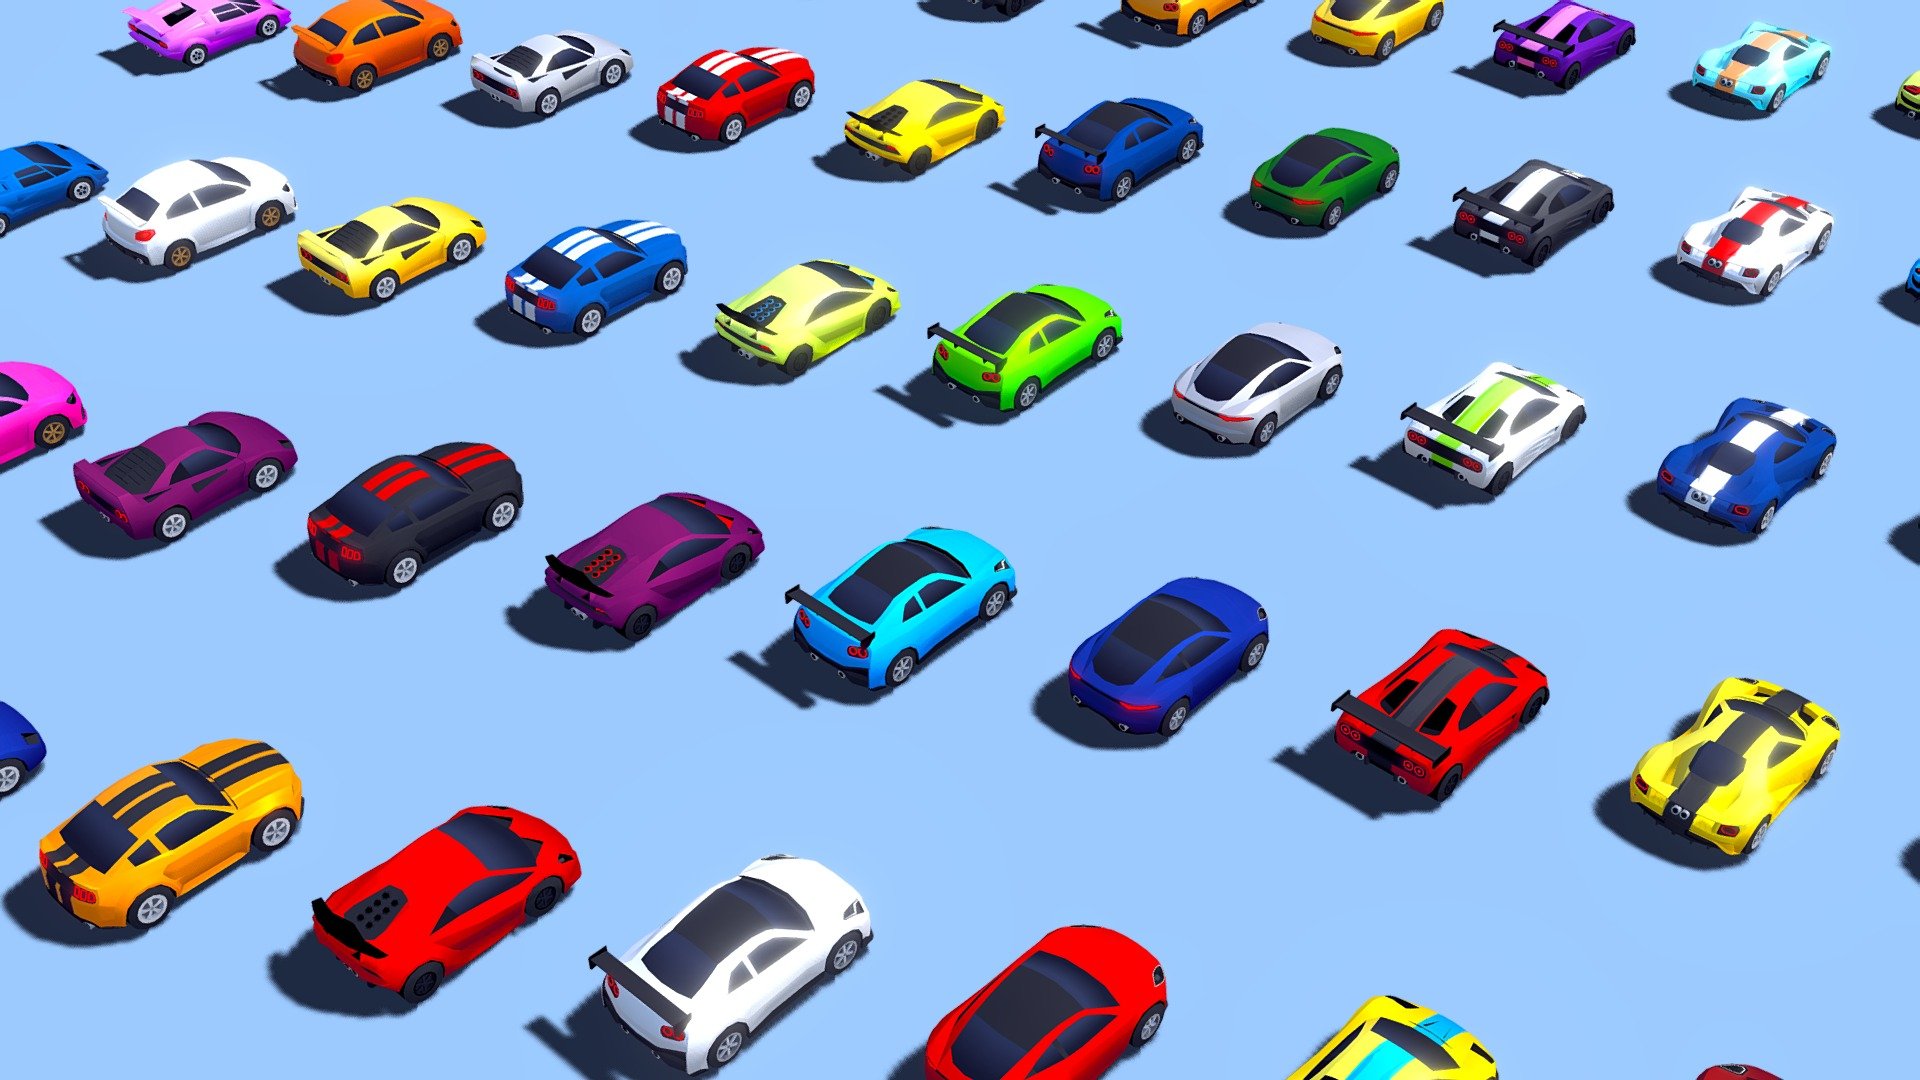 🏁 This pack is a bundle. ORIGINAL PRICE: $69.90. Savings: 64% OFF 

RACING VEHICLES (x10).


5 COLORS FOR EACH CAR (50 car variations).
3100 - 3850 triangles per car (wheels included).
Prefabs included.
Cars use 2 materials (texture atlas of 512px * 512px).
Cartoon design.
FBX Files included

It includes my following models:


Kong (Price: $6.99 USD).
Bull (Price: $6.99 USD).
Cheetah (Price: $6.99 USD).
GT (Price: $6.99 USD).
Mamba (Price: $6.99 USD).
Miles-K (Price: $6.99 USD).
MS7 (Price: $6.99 USD).
Pleyades (Price: $6.99 USD).
Snake (Price: $6.99 USD).
Vice (Price: $6.99 USD).

Total: $69.90 USD.

You can check this models in my Sketchfab profile. Best regards 3d model